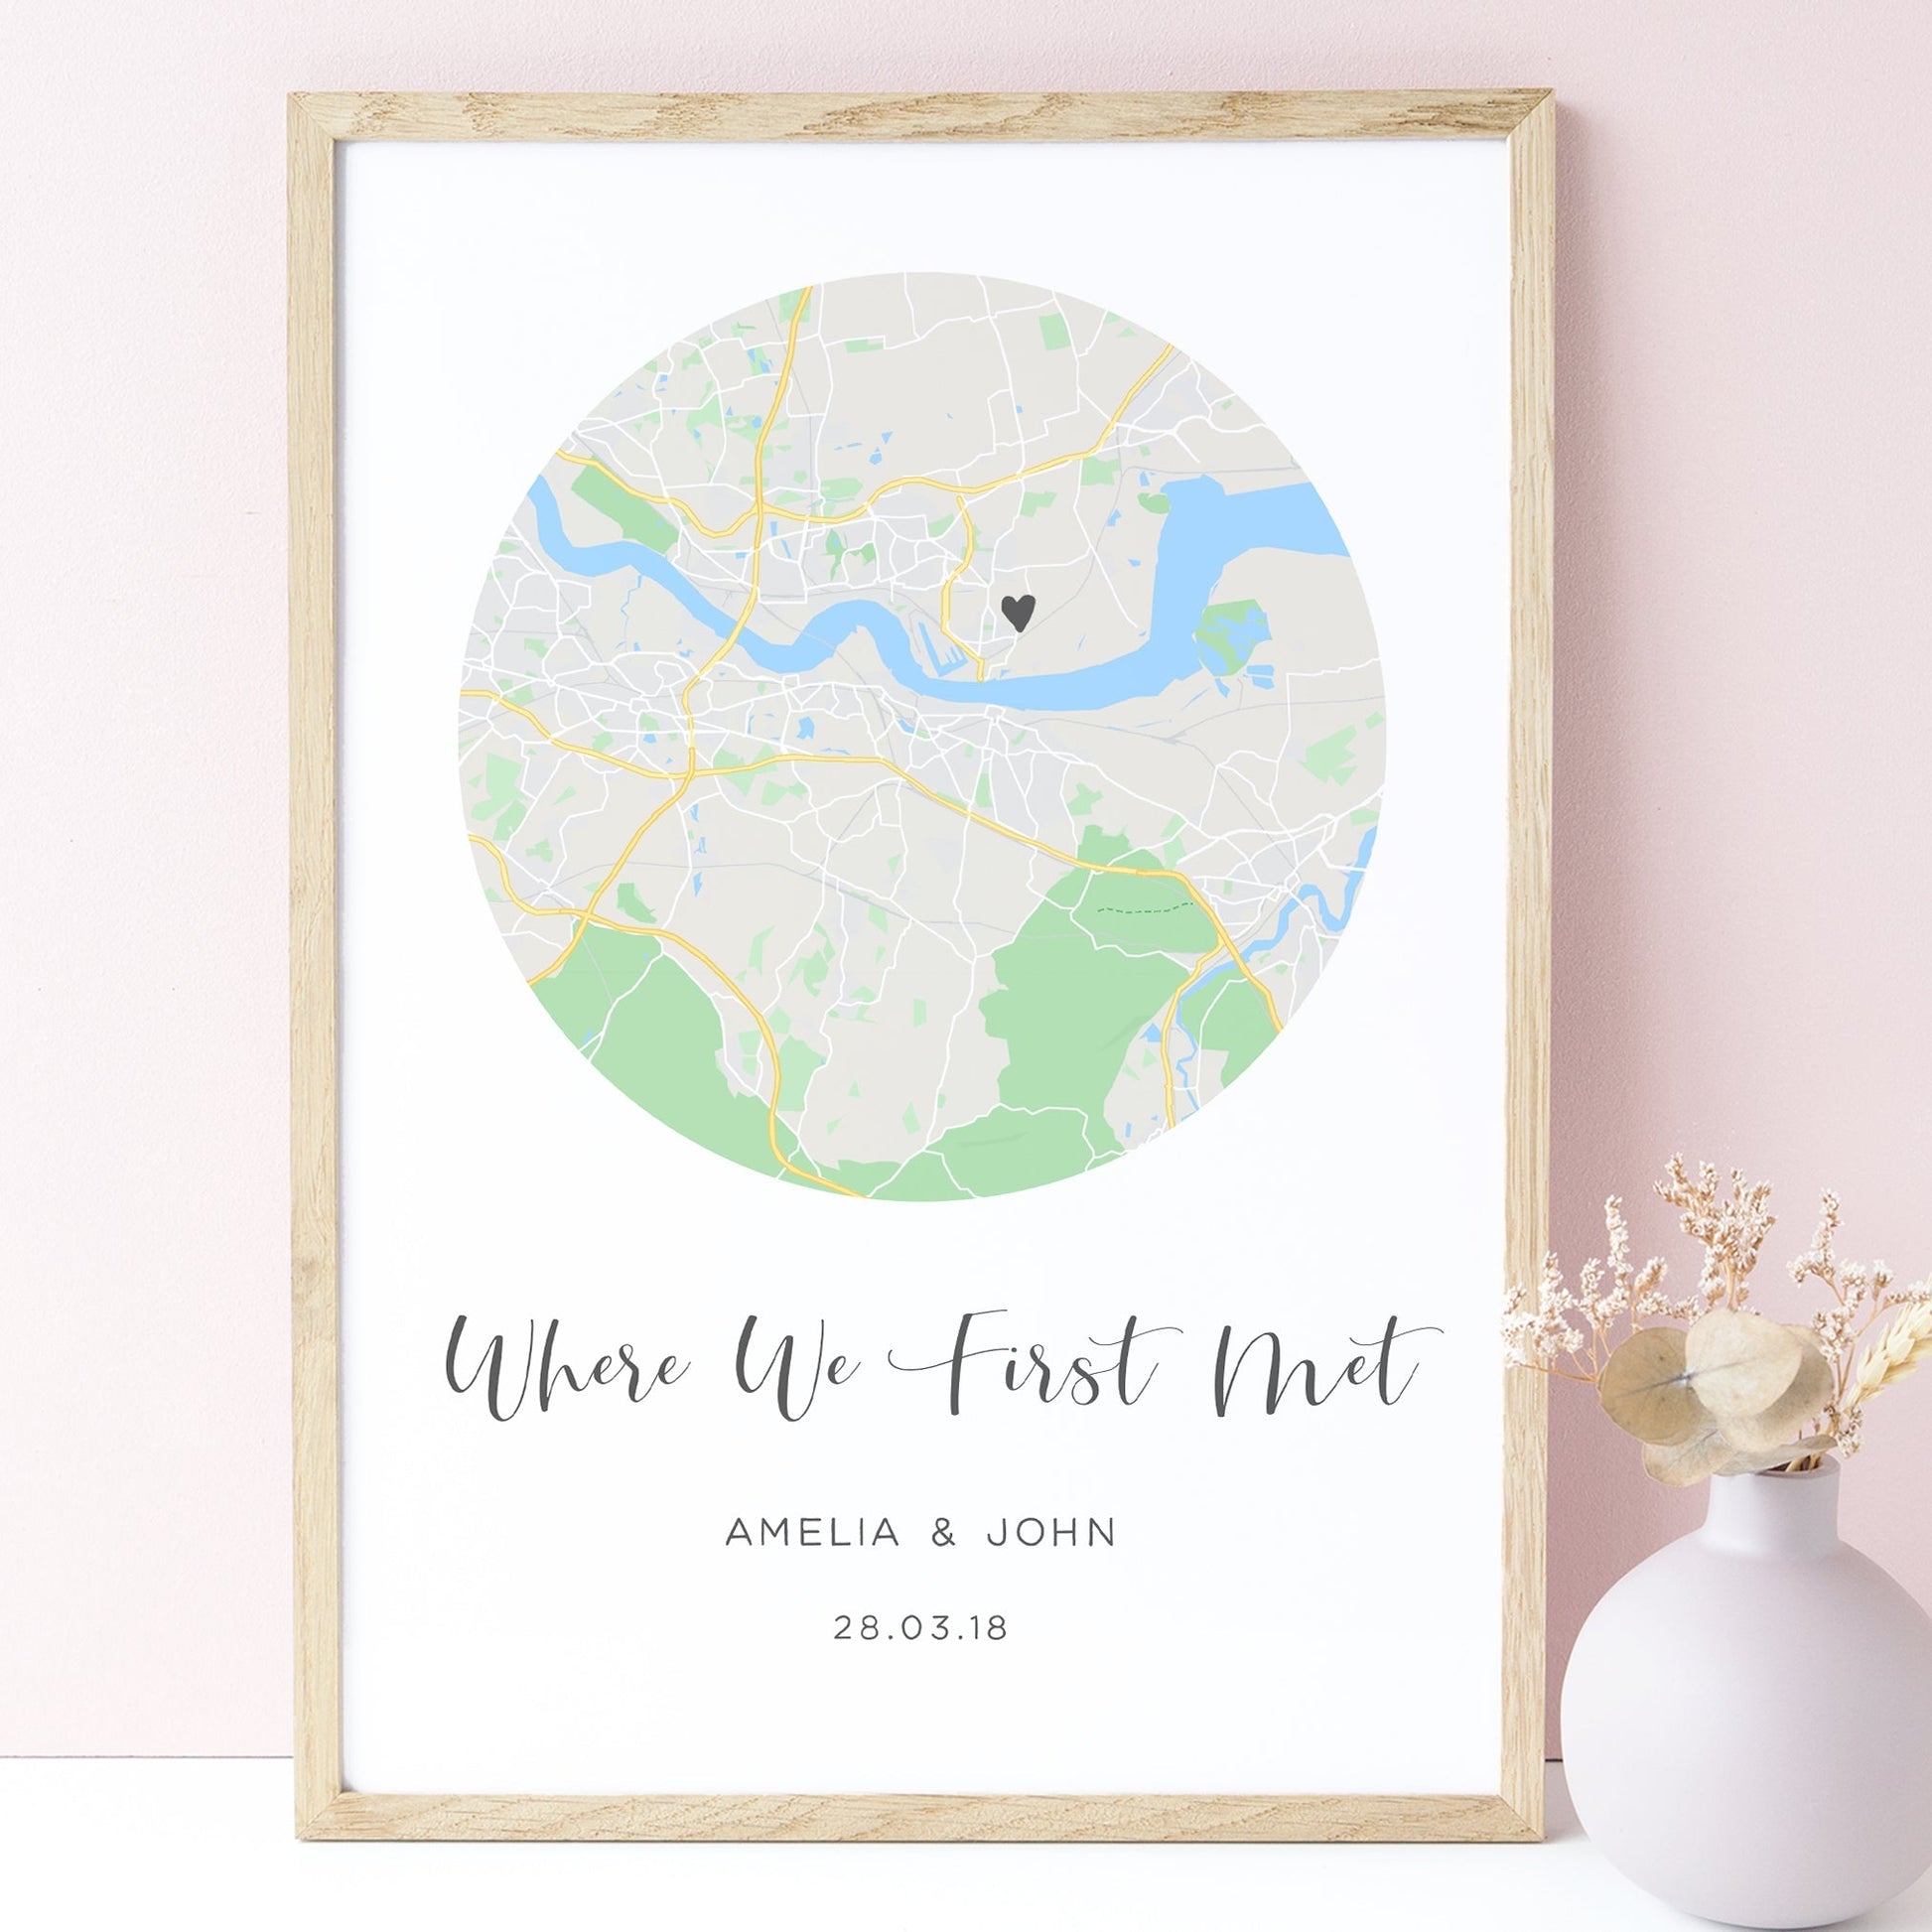 city map print personalised by location where we first met anniversary gift matte paperstock unframed